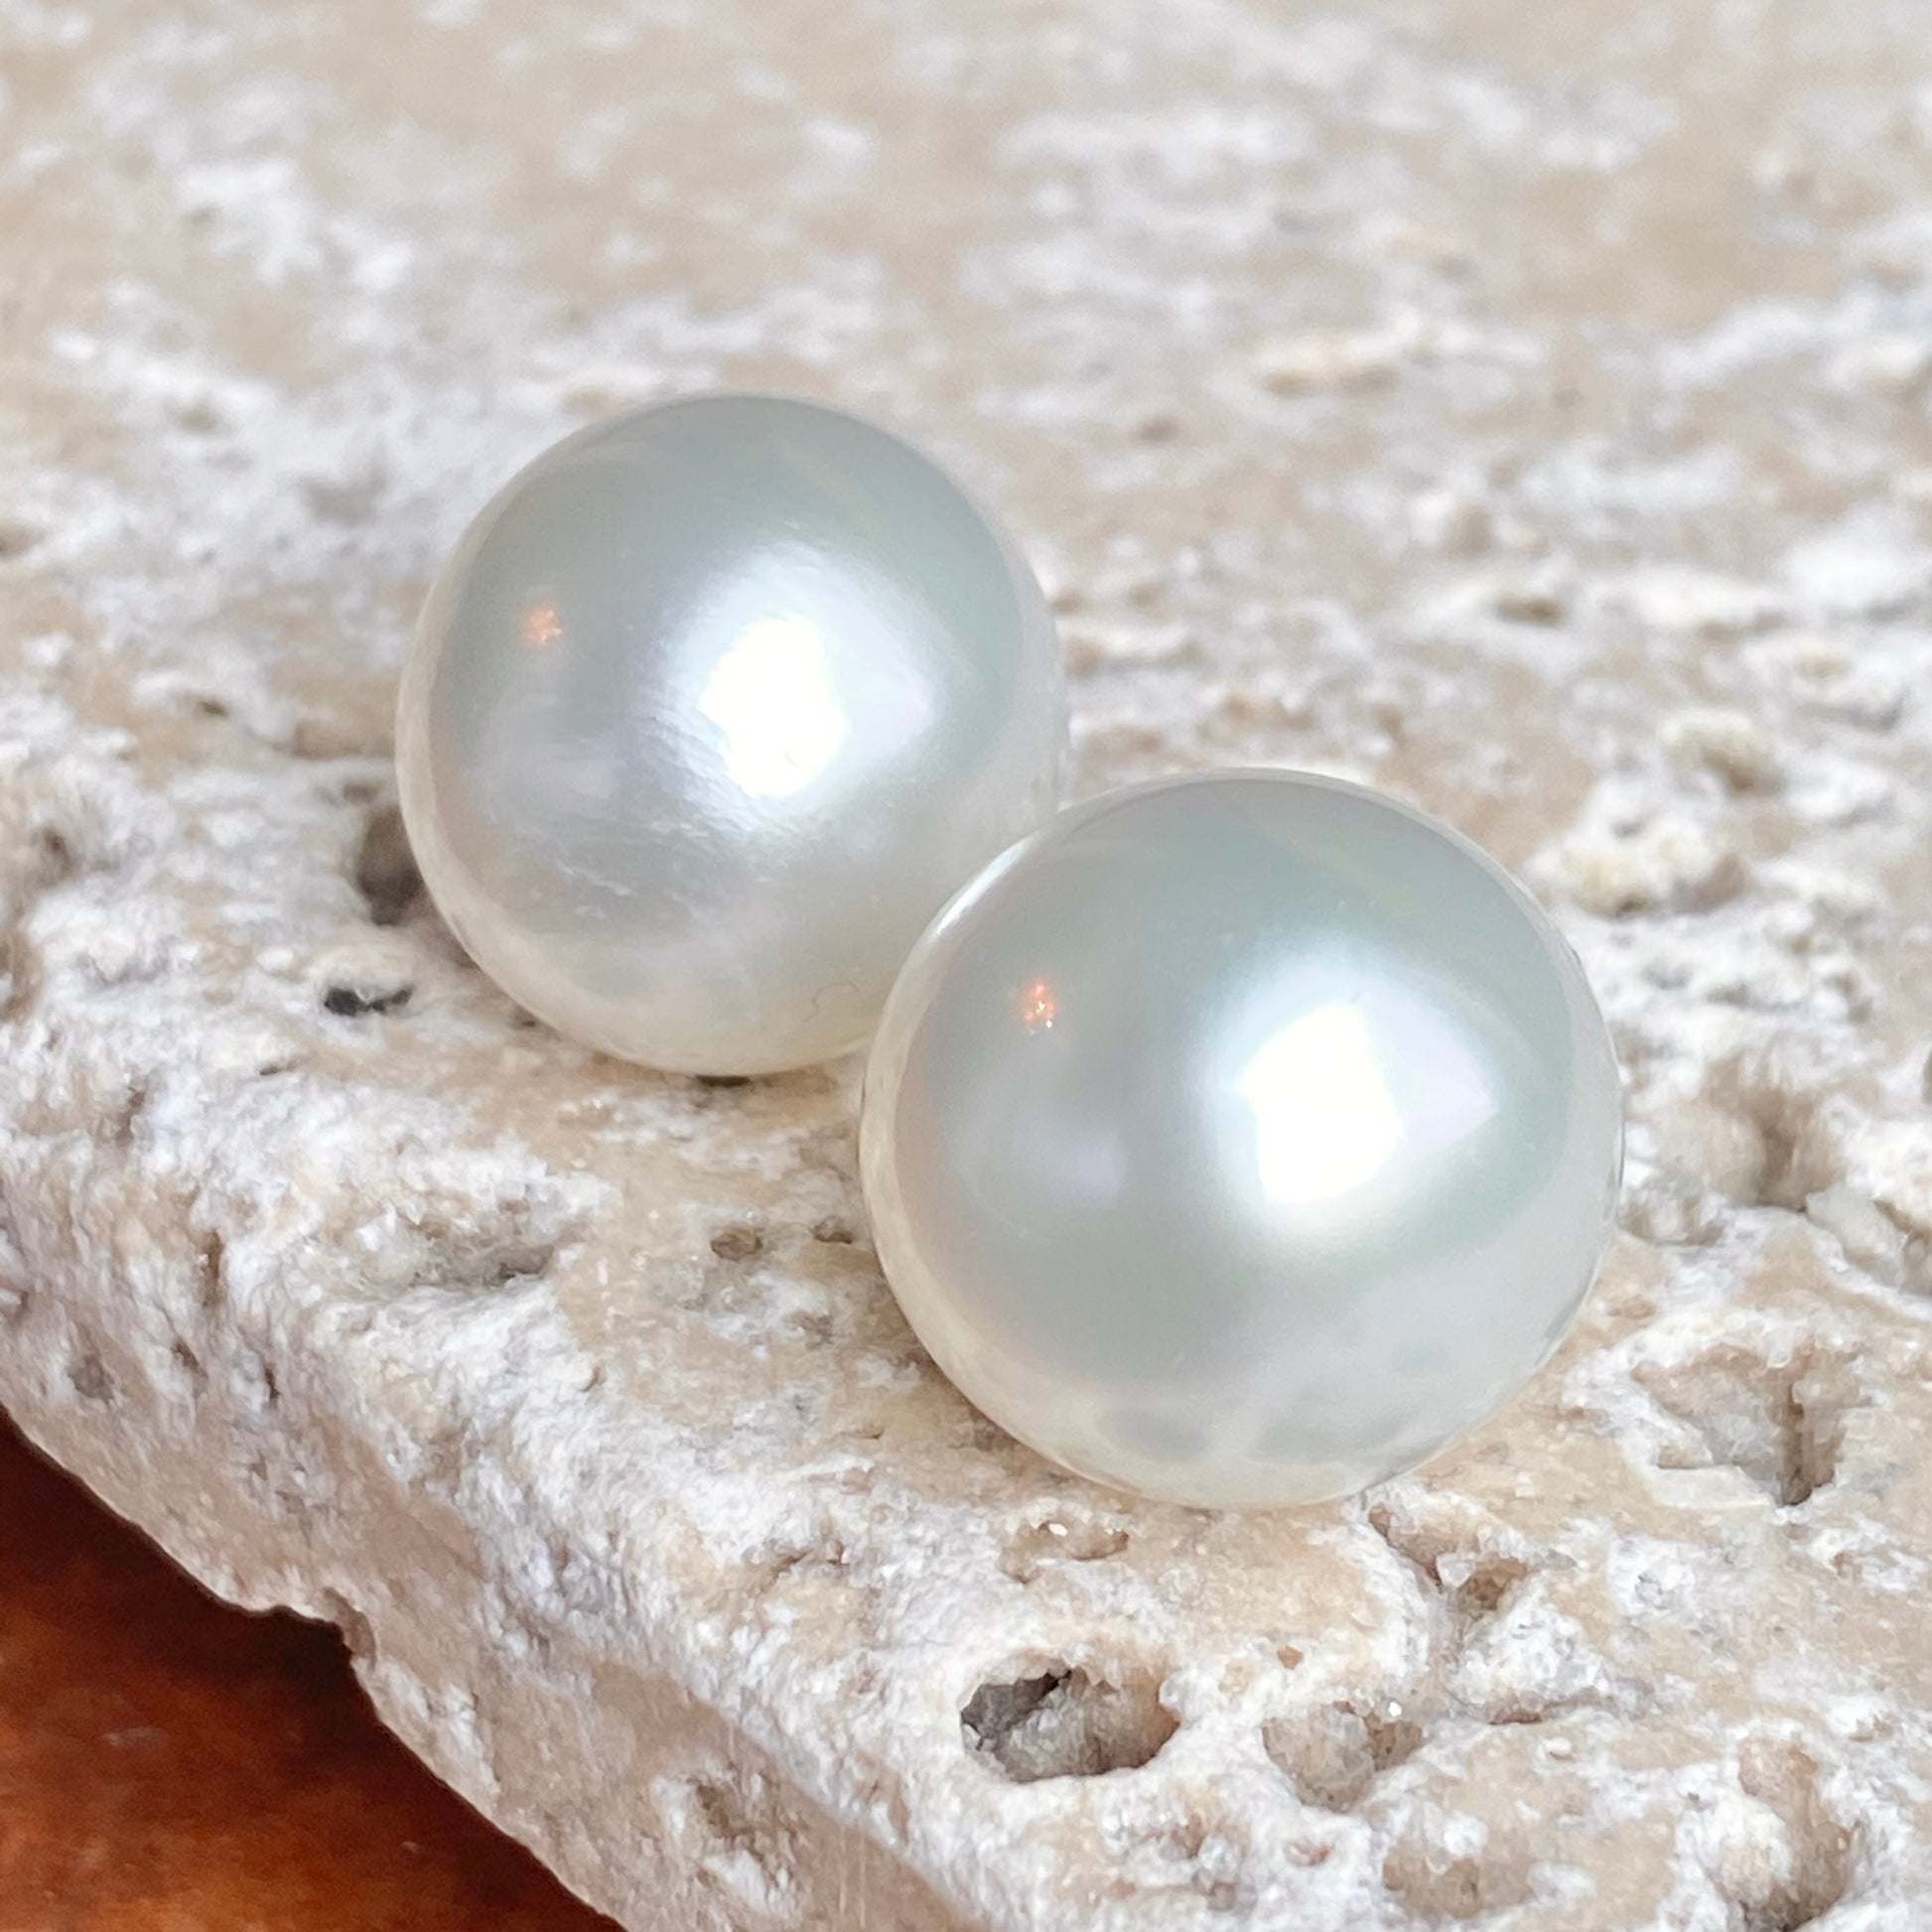 Genuine Cultured Paspaley South Sea Loose Pearl Pair "Fashion" Quality 14mm, Genuine Cultured Paspaley South Sea Loose Pearl Pair "Fashion" Quality 14mm - Legacy Saint Jewelry